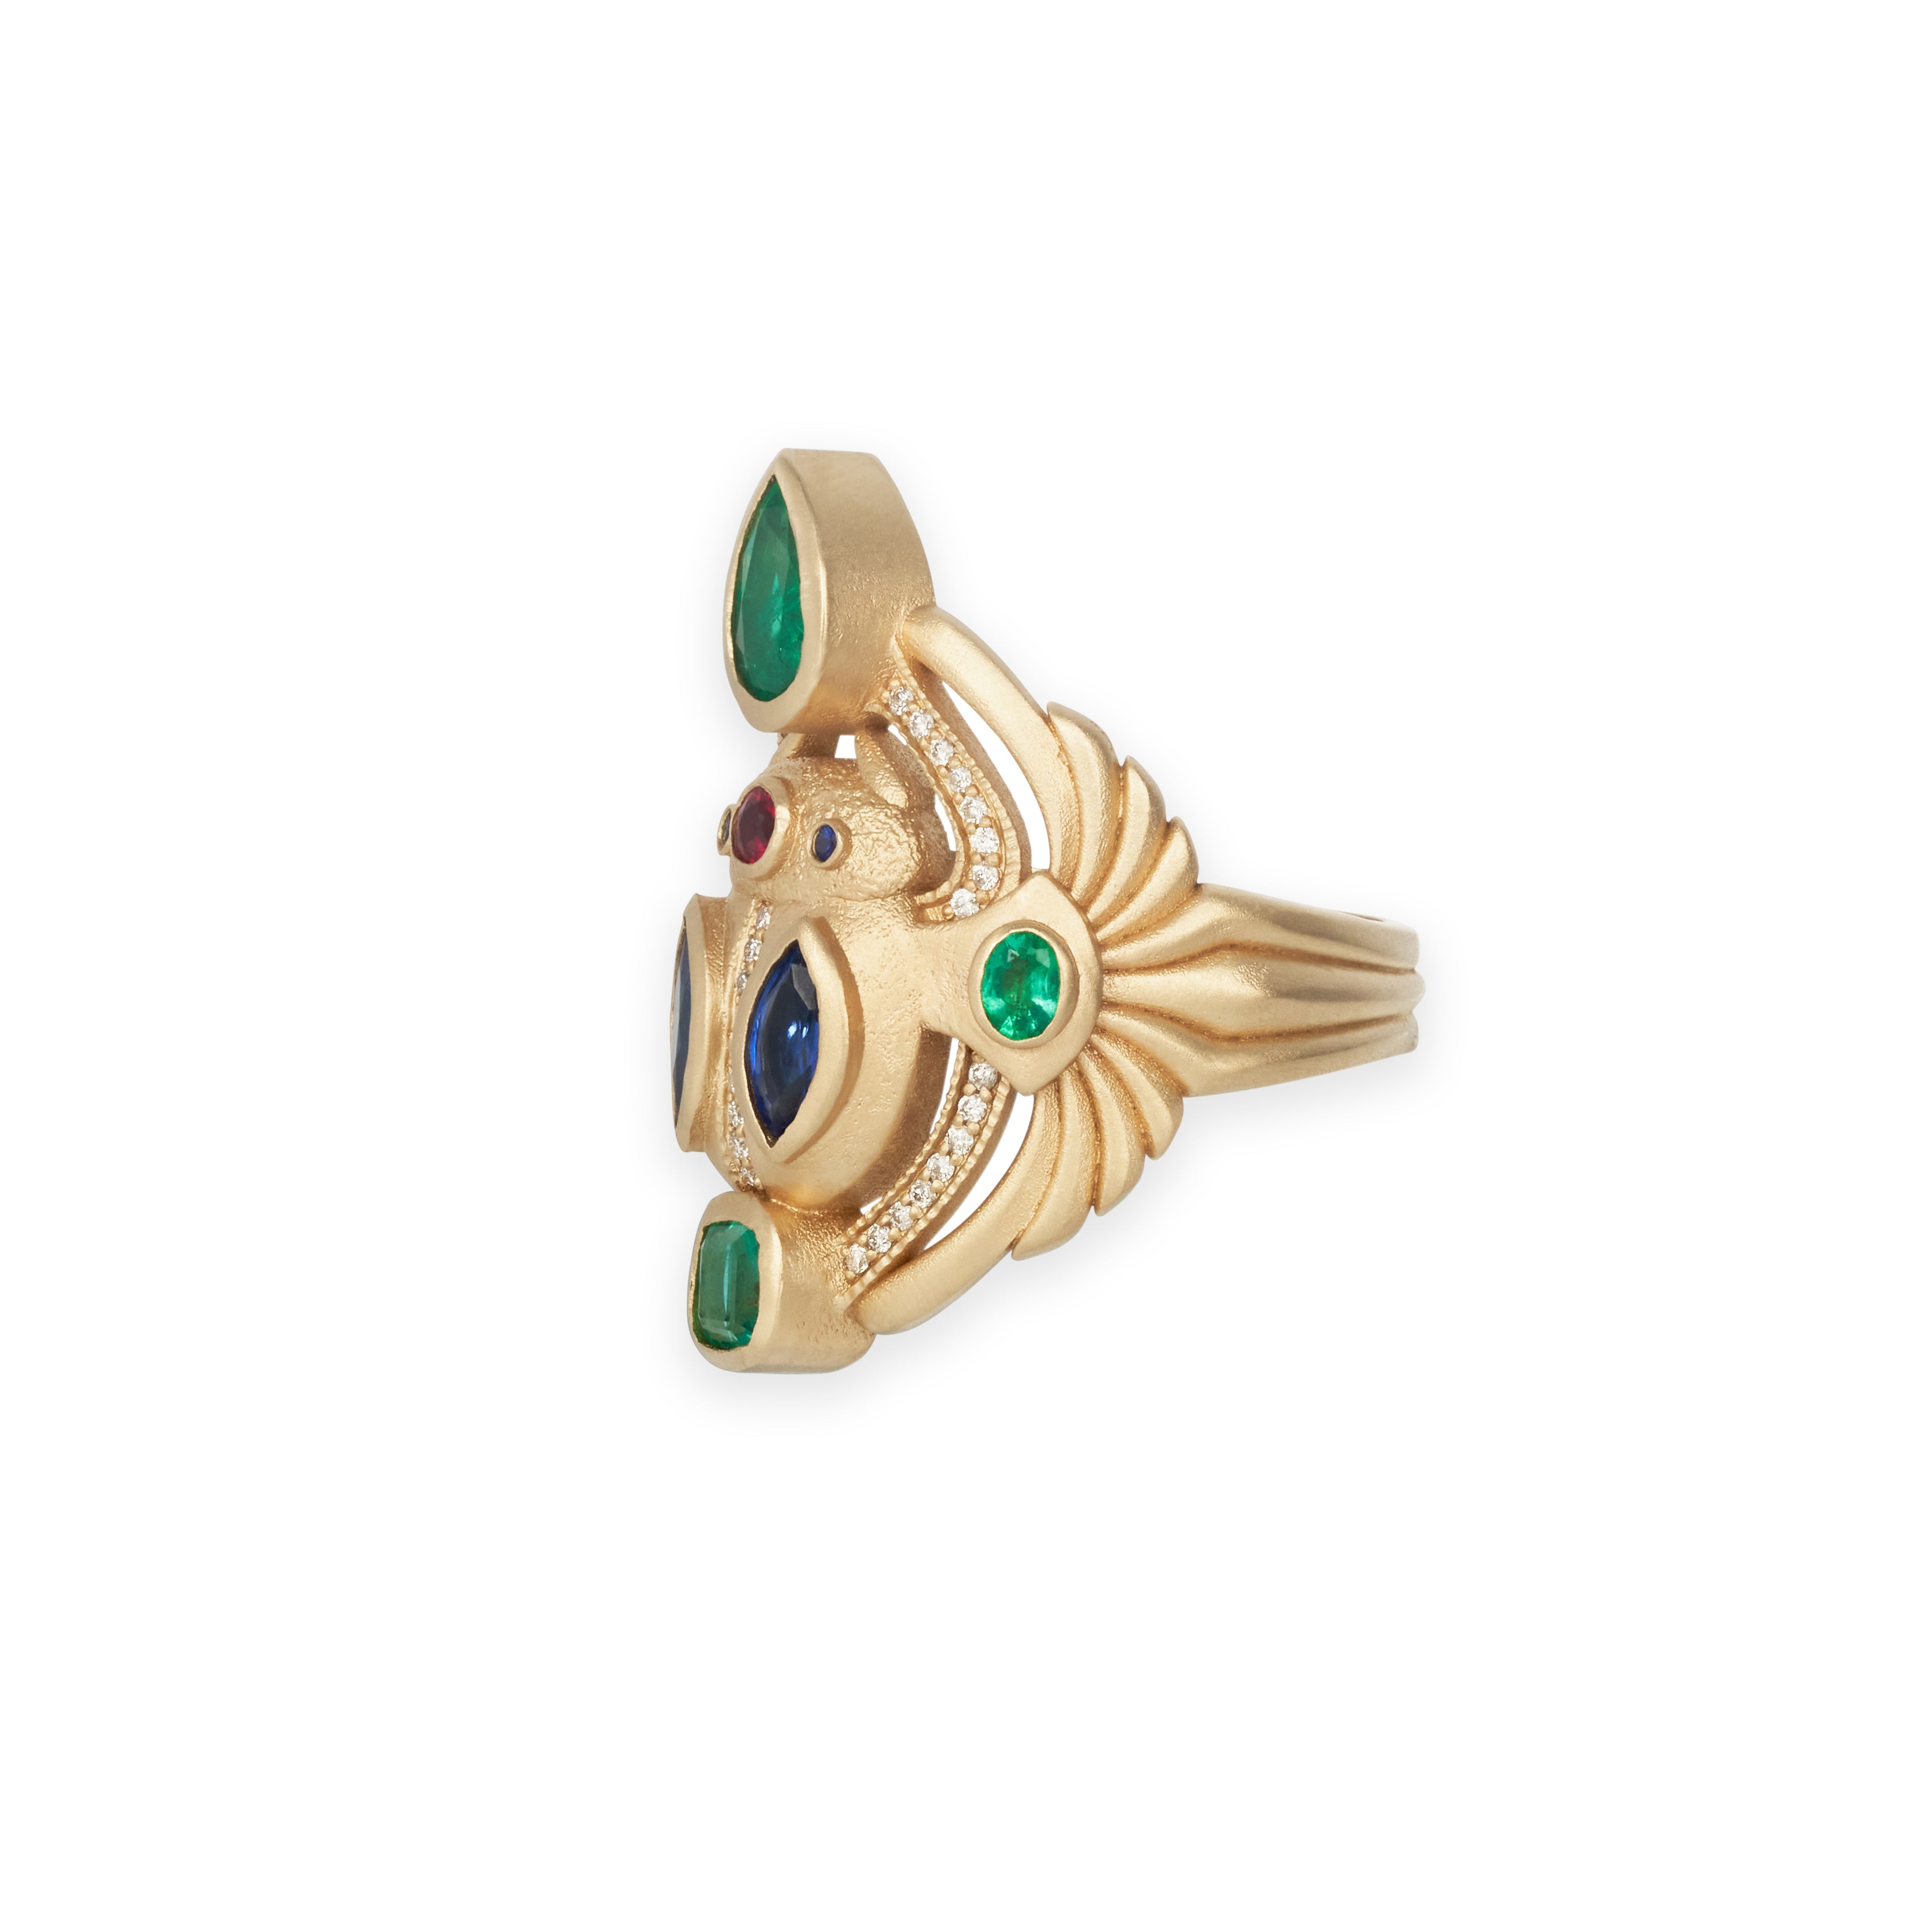 LARGE PAVE EMERALD, SAPPHIRE, RUBY SCARAB RING